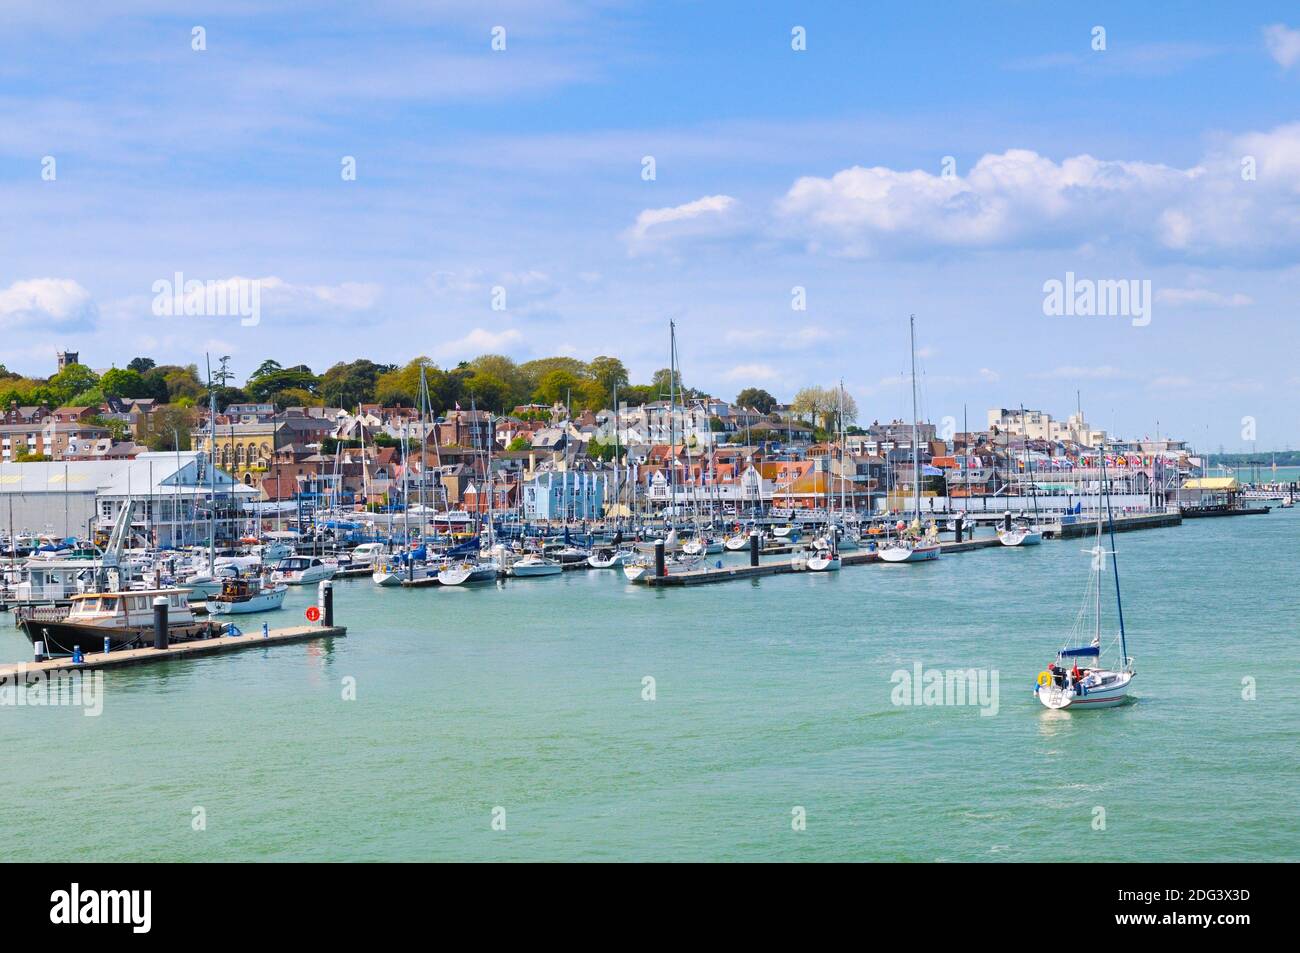 Cowes, Isle of Wight, England, UK.  Yachts and boats moored in the marina. Stock Photo